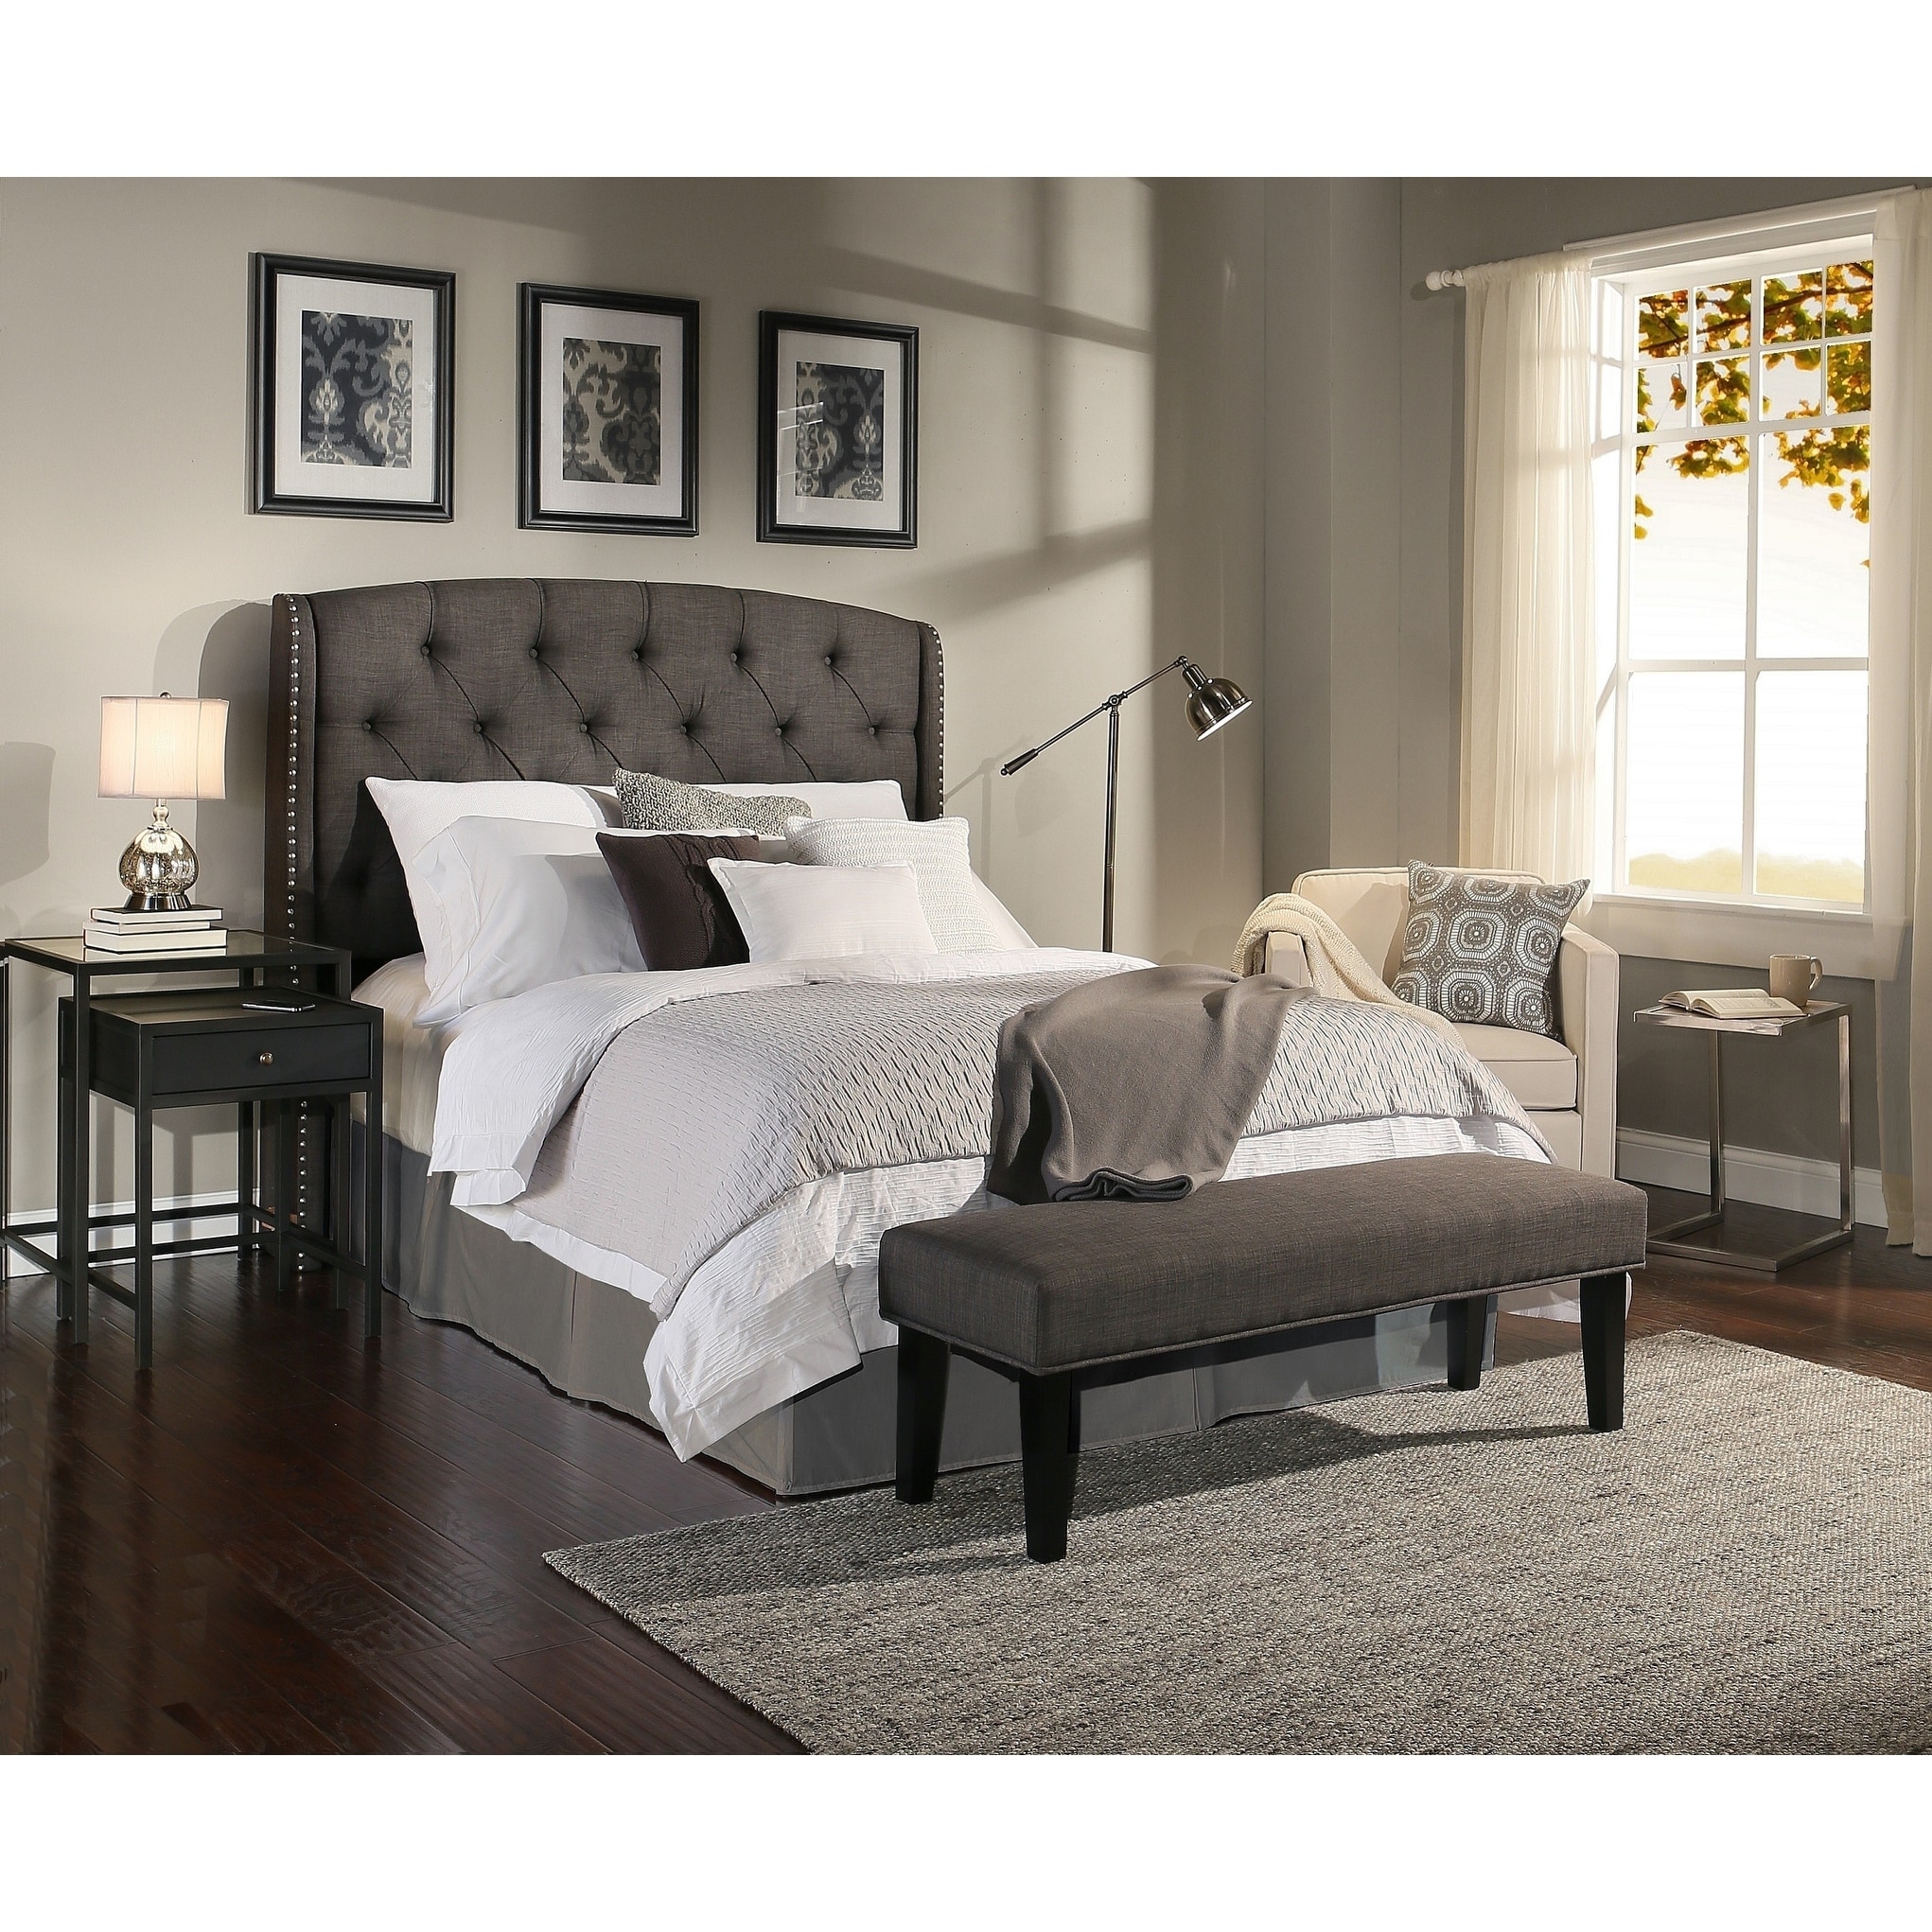 https://ak1.ostkcdn.com/images/products/17427205/Republic-Design-House-Peyton-Ivory-or-Grey-Tufted-Upholstered-HB-Only-d5ba3e27-5246-4980-a45d-22be4d50345b.jpg